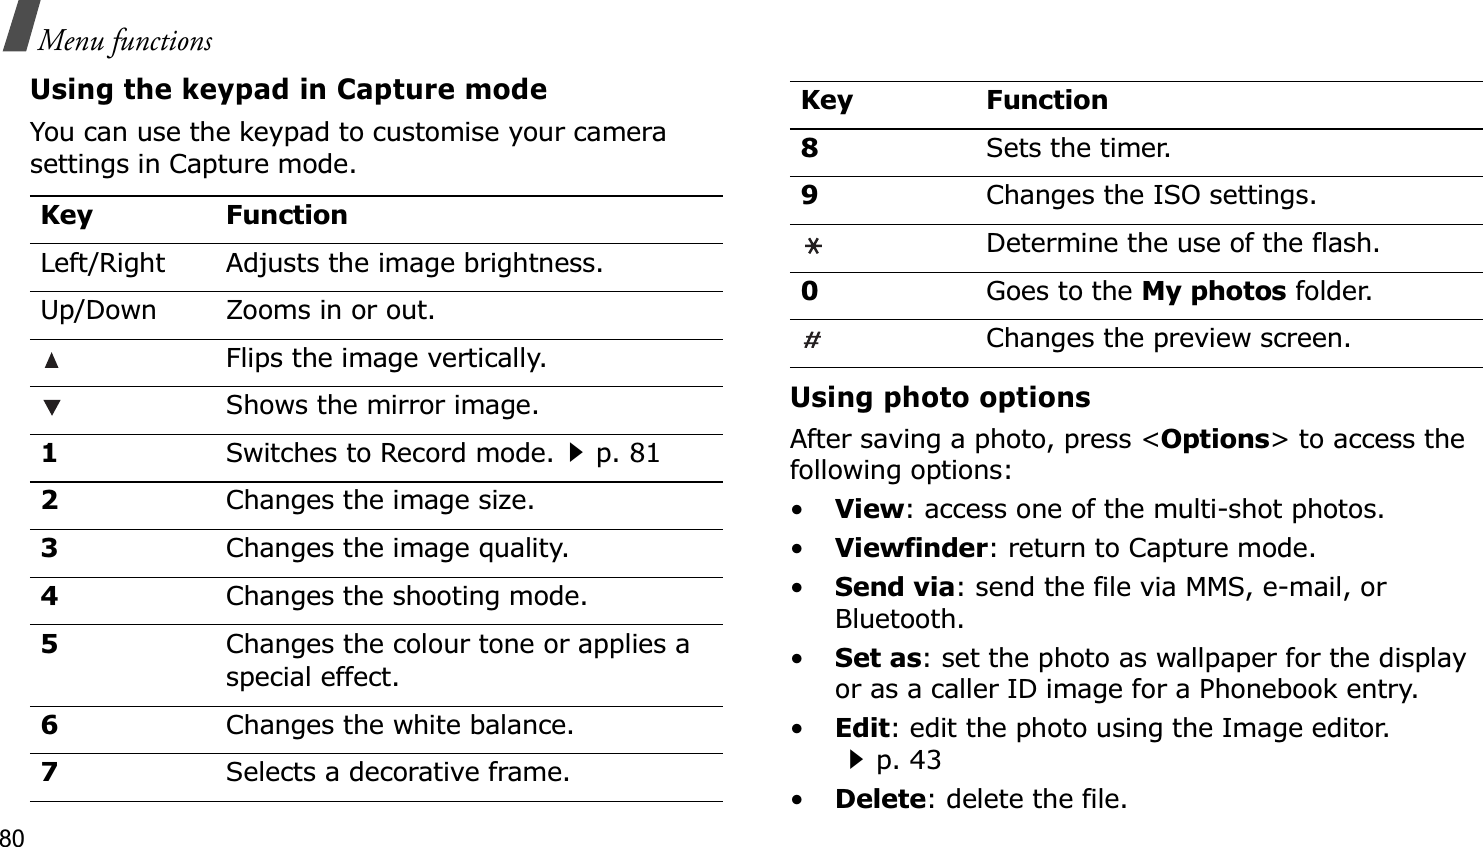 80Menu functionsUsing the keypad in Capture modeYou can use the keypad to customise your camera settings in Capture mode.Using photo optionsAfter saving a photo, press &lt;Options&gt; to access the following options:•View: access one of the multi-shot photos.•Viewfinder: return to Capture mode.•Send via: send the file via MMS, e-mail, or Bluetooth.•Set as: set the photo as wallpaper for the display or as a caller ID image for a Phonebook entry.•Edit: edit the photo using the Image editor.p. 43•Delete: delete the file.Key FunctionLeft/Right Adjusts the image brightness.Up/Down Zooms in or out.Flips the image vertically.Shows the mirror image.1Switches to Record mode.p. 812Changes the image size. 3Changes the image quality.4Changes the shooting mode.5Changes the colour tone or applies a special effect.6Changes the white balance.7Selects a decorative frame.8Sets the timer.9Changes the ISO settings.Determine the use of the flash.0Goes to the My photos folder.Changes the preview screen.Key Function